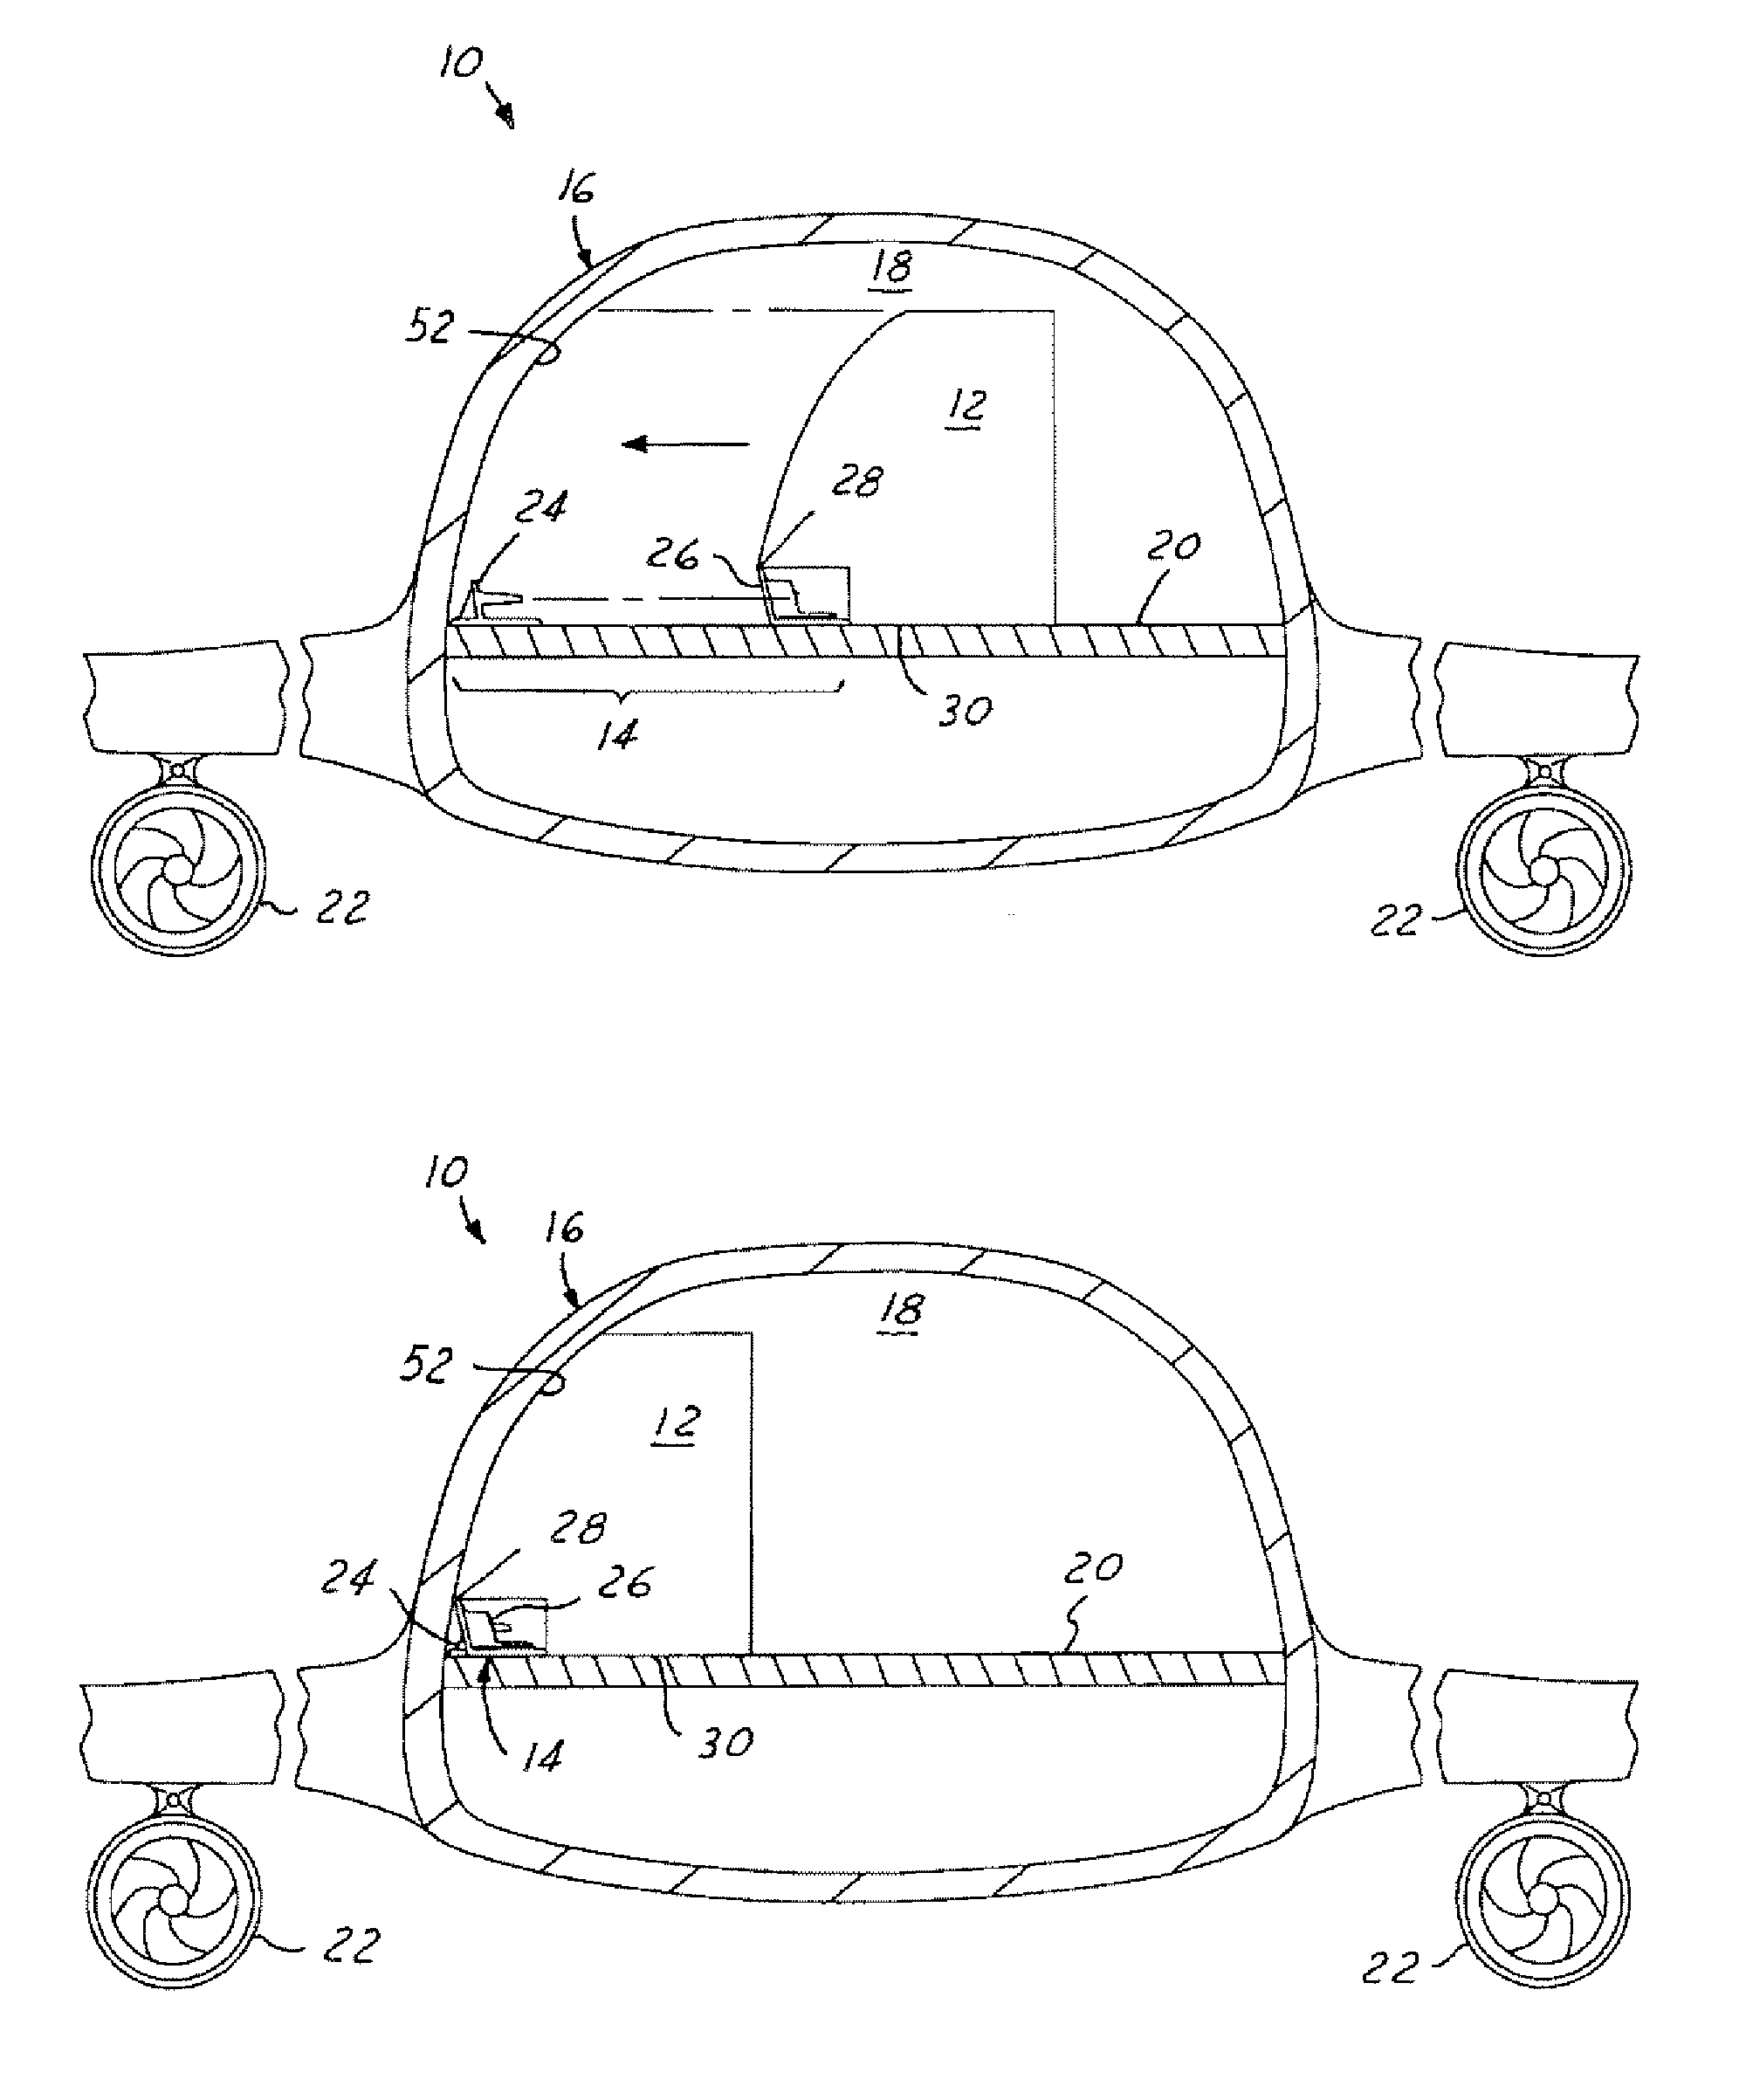 Self-locating fastening assembly and method for integrating a monument within an aircraft